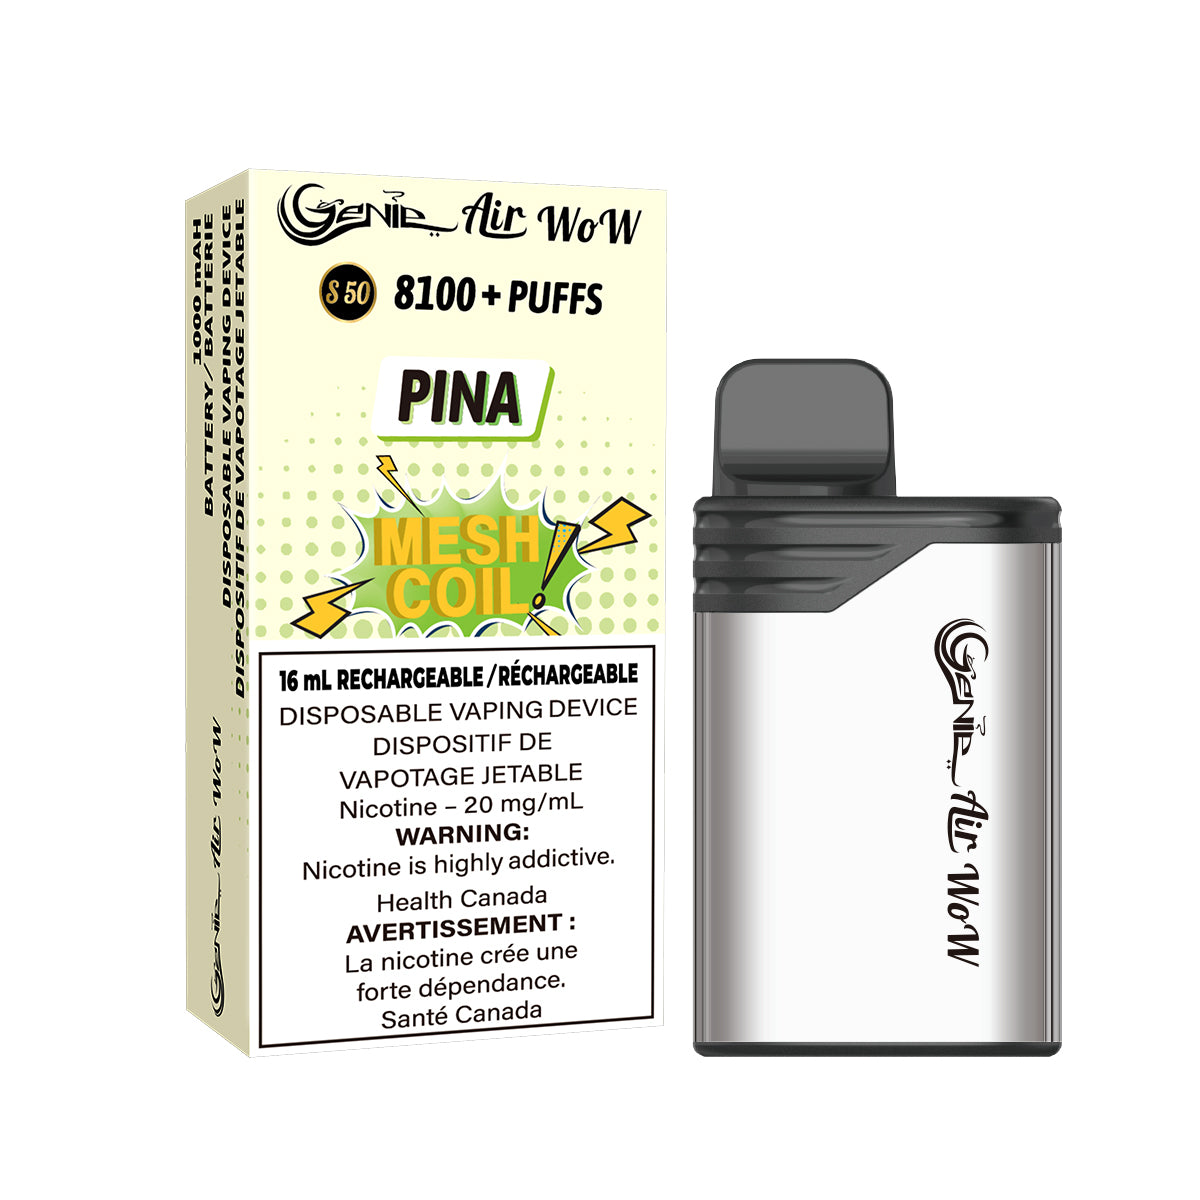 GENIE AIR WOW - pina 8100 Puffs  20 mg / mL Salt Nicotine  Juice Capacity: 16 mL  Battery: 1000 mAh Rechargeable   Mesh Coil Technology    s50